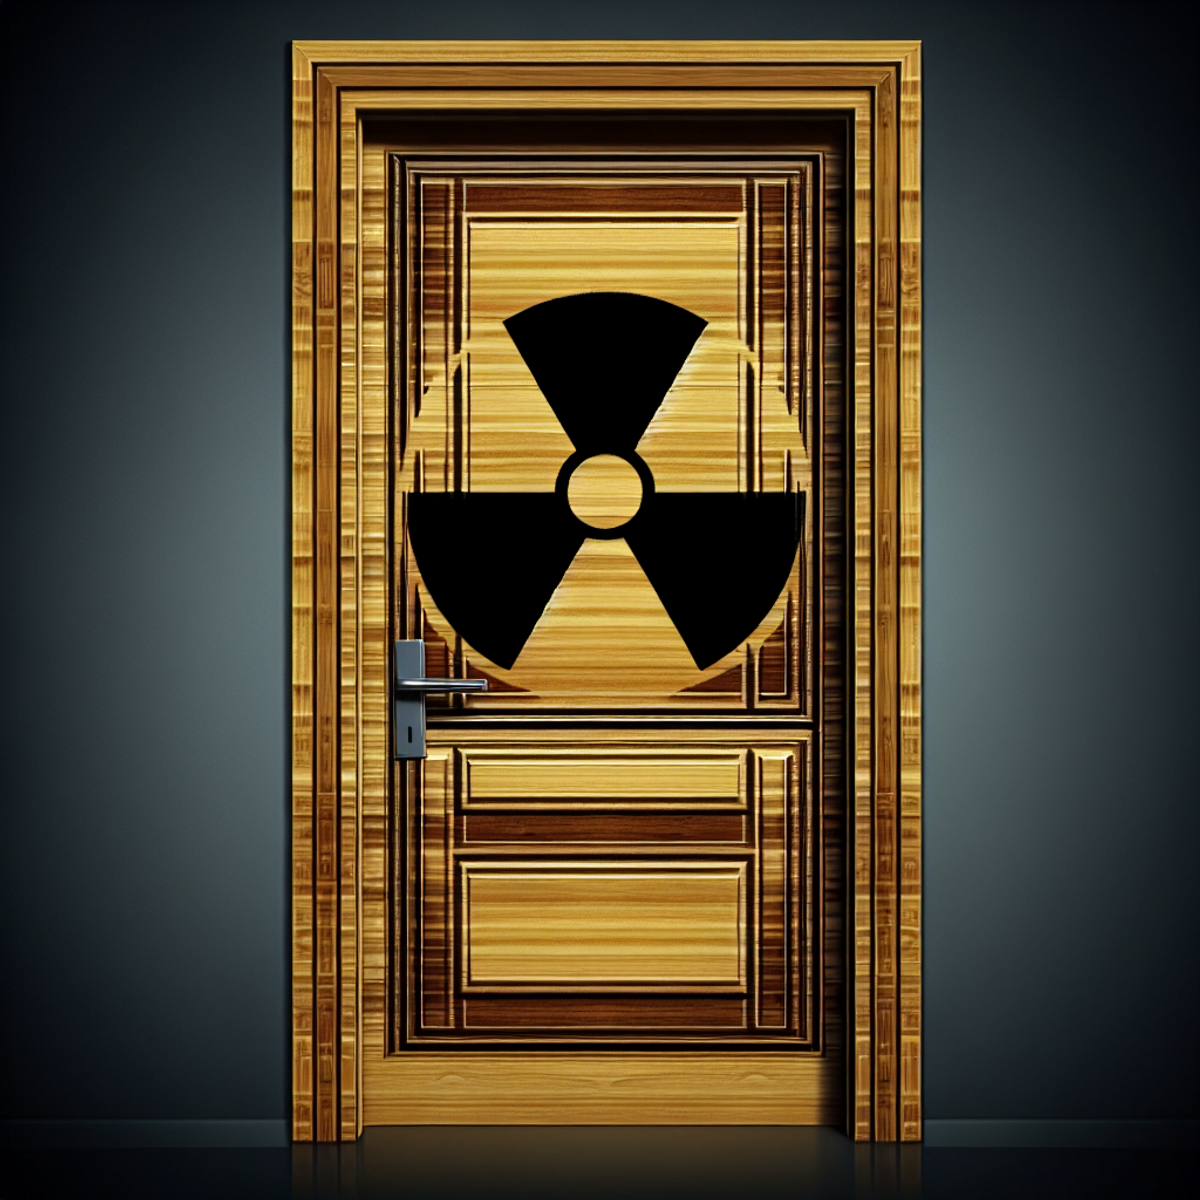 A sturdy apartment door with a nuclear fallout shelter symbol.